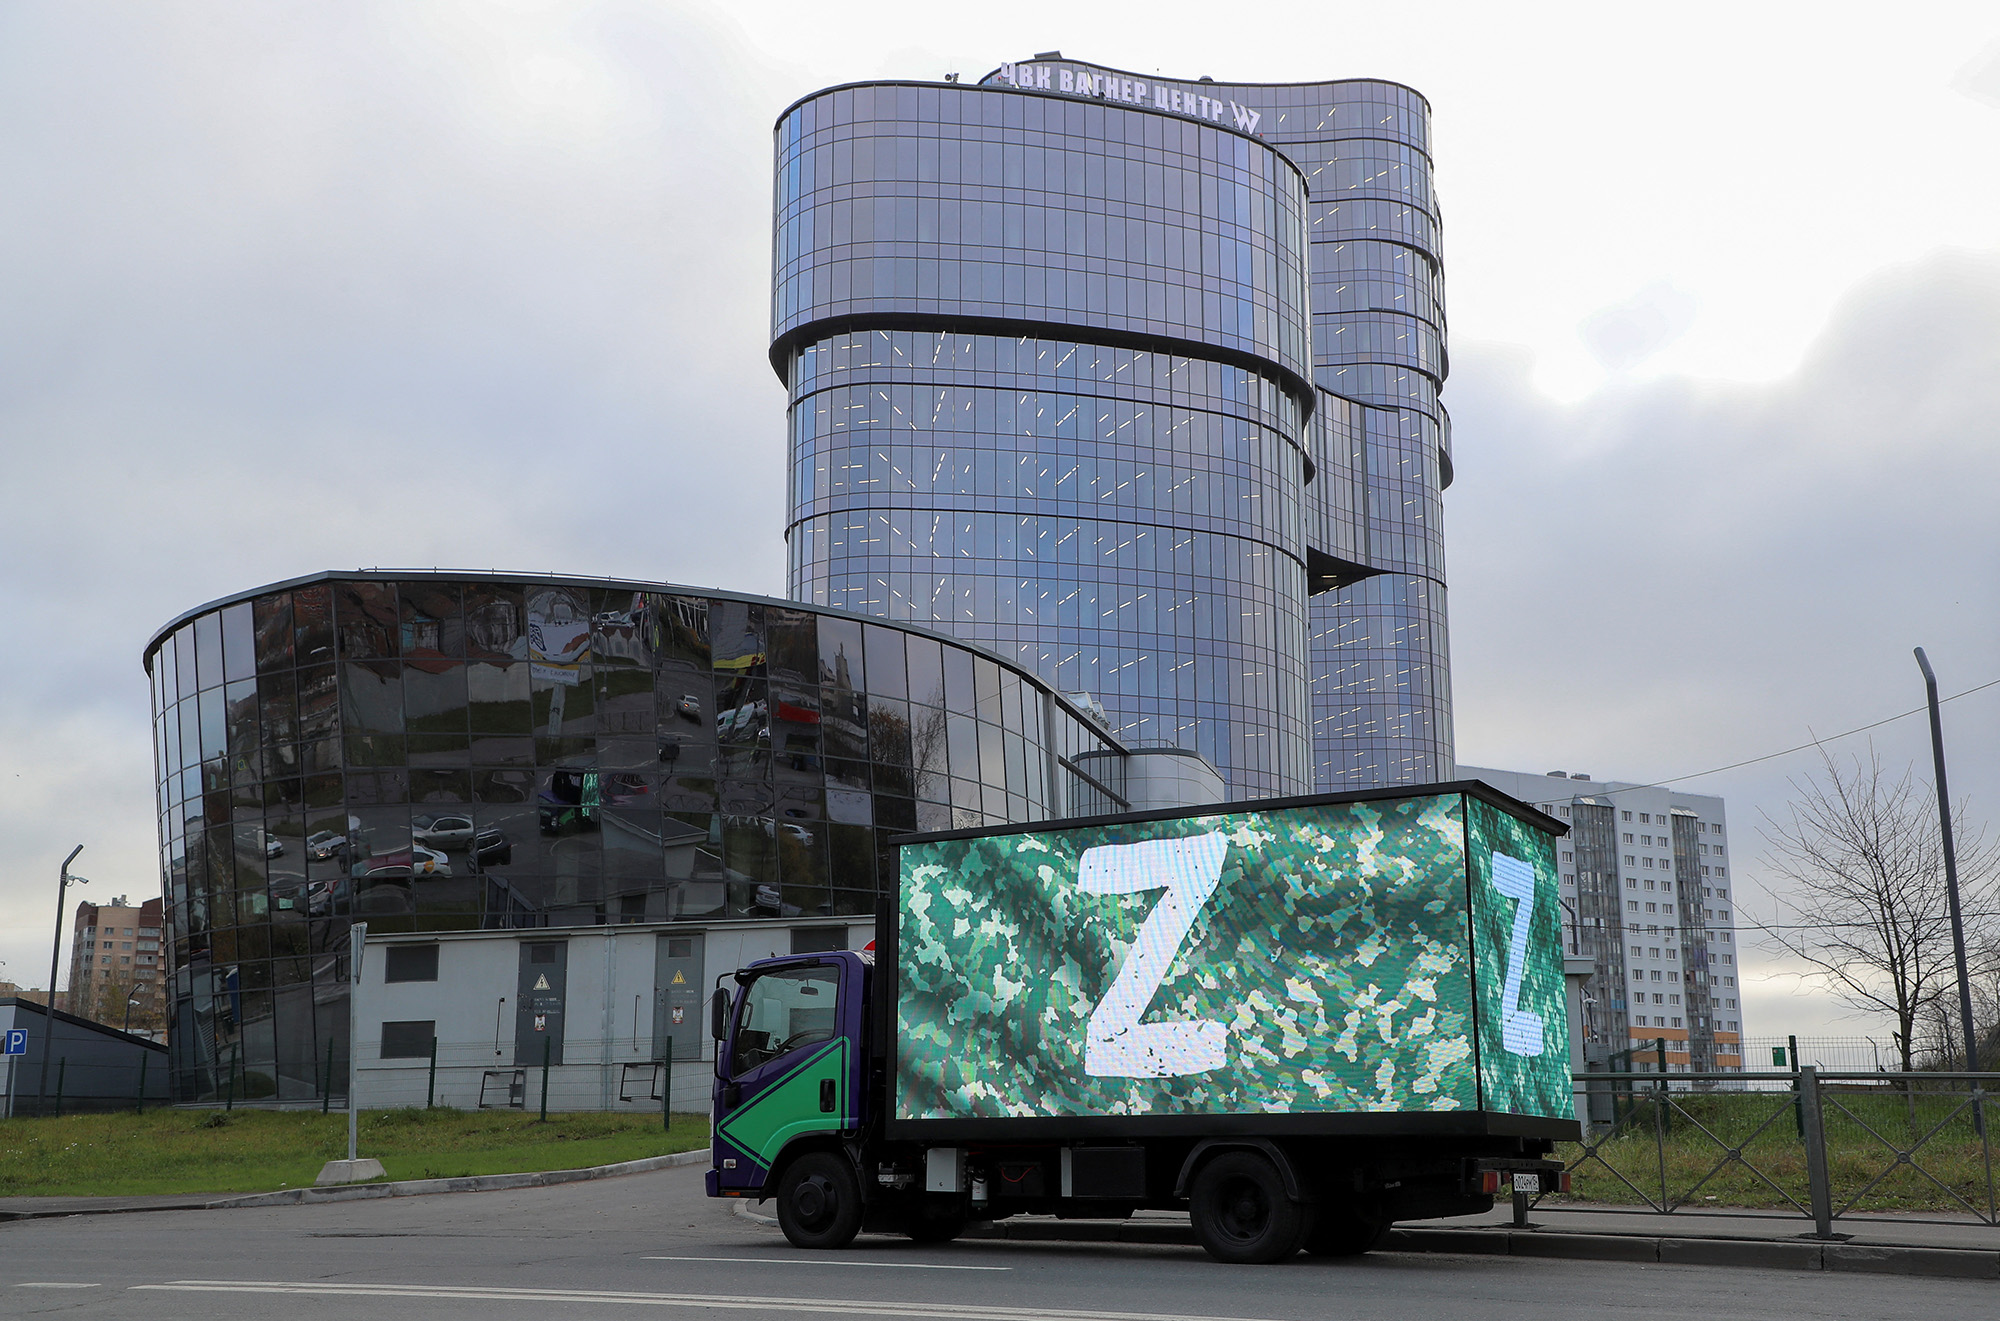 A truck showing the icons "z" Supporters of the Russian armed forces involved in the military conflict in Ukraine parked outside the PMC Wagner Center during the official opening of the office block in Saint Petersburg, Russia, on November 4.